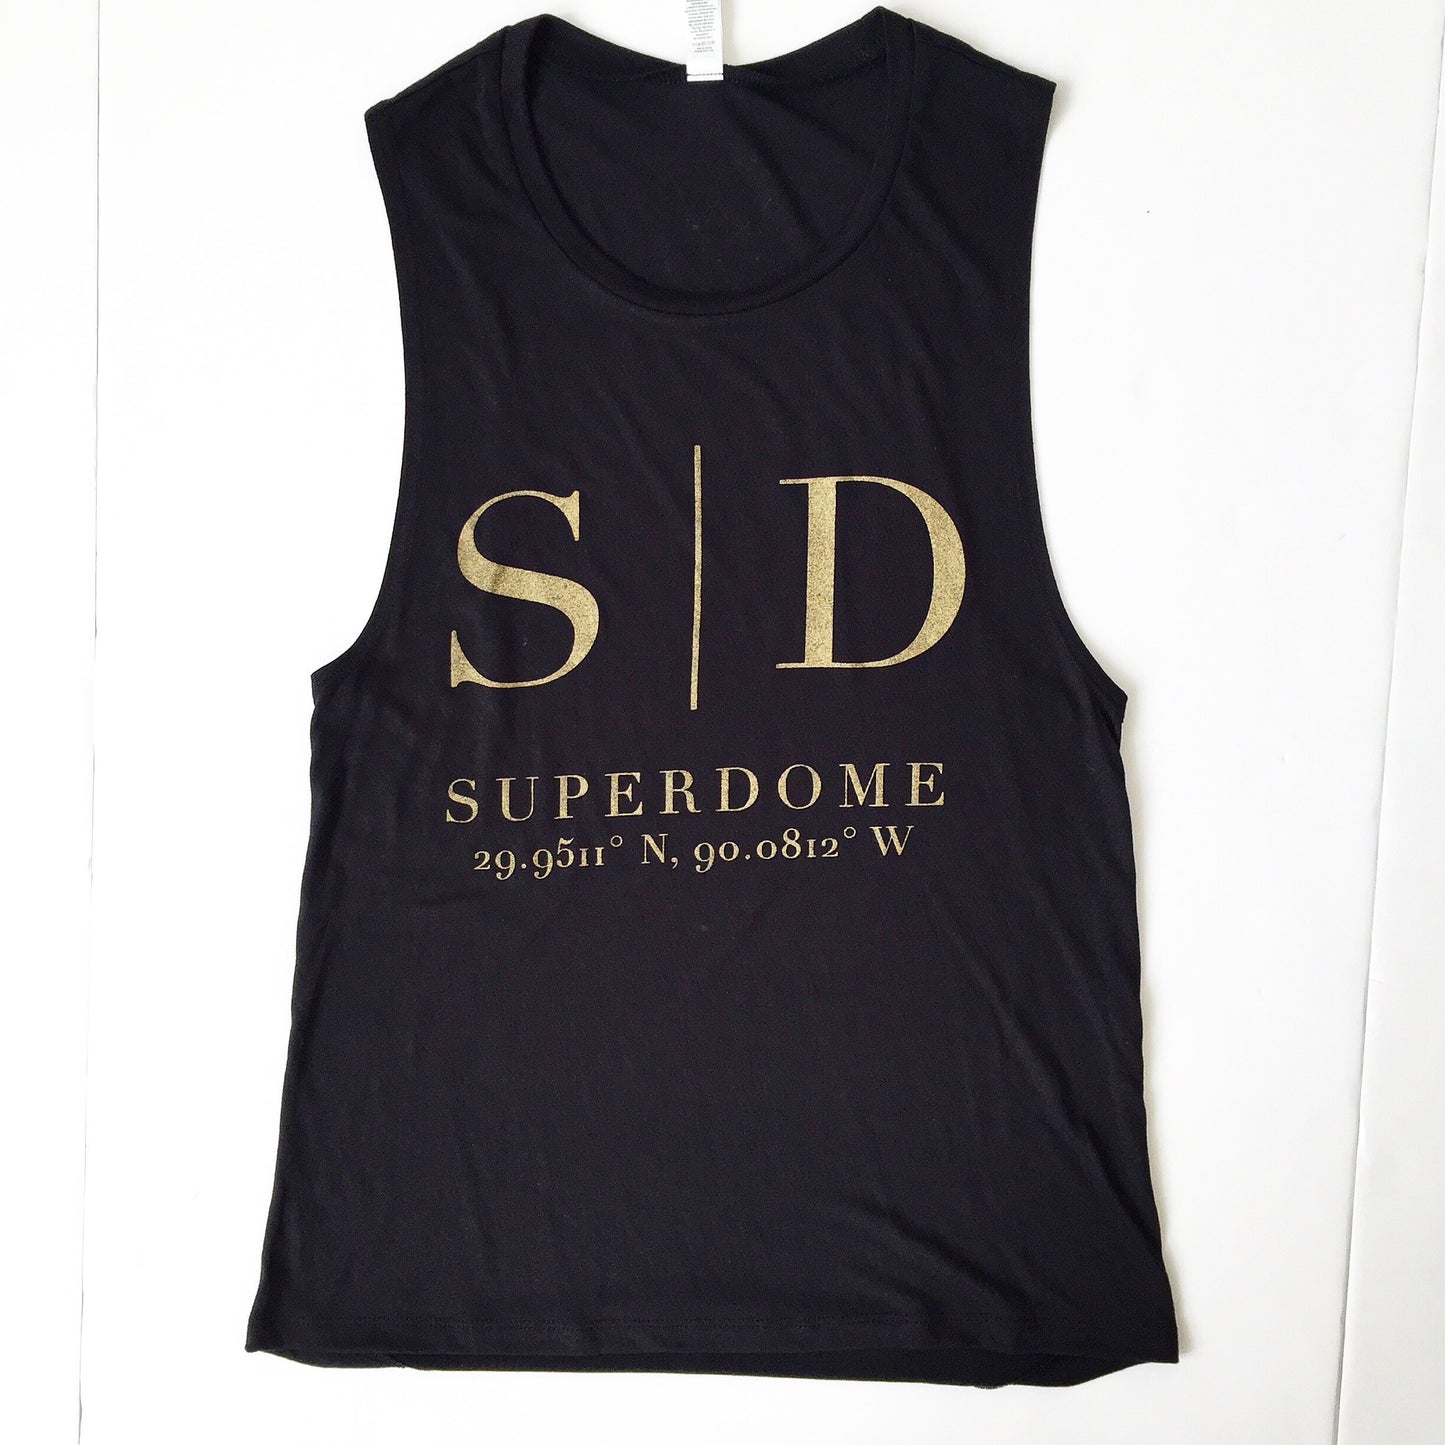 MR Superdome Coord. Muscle Tank